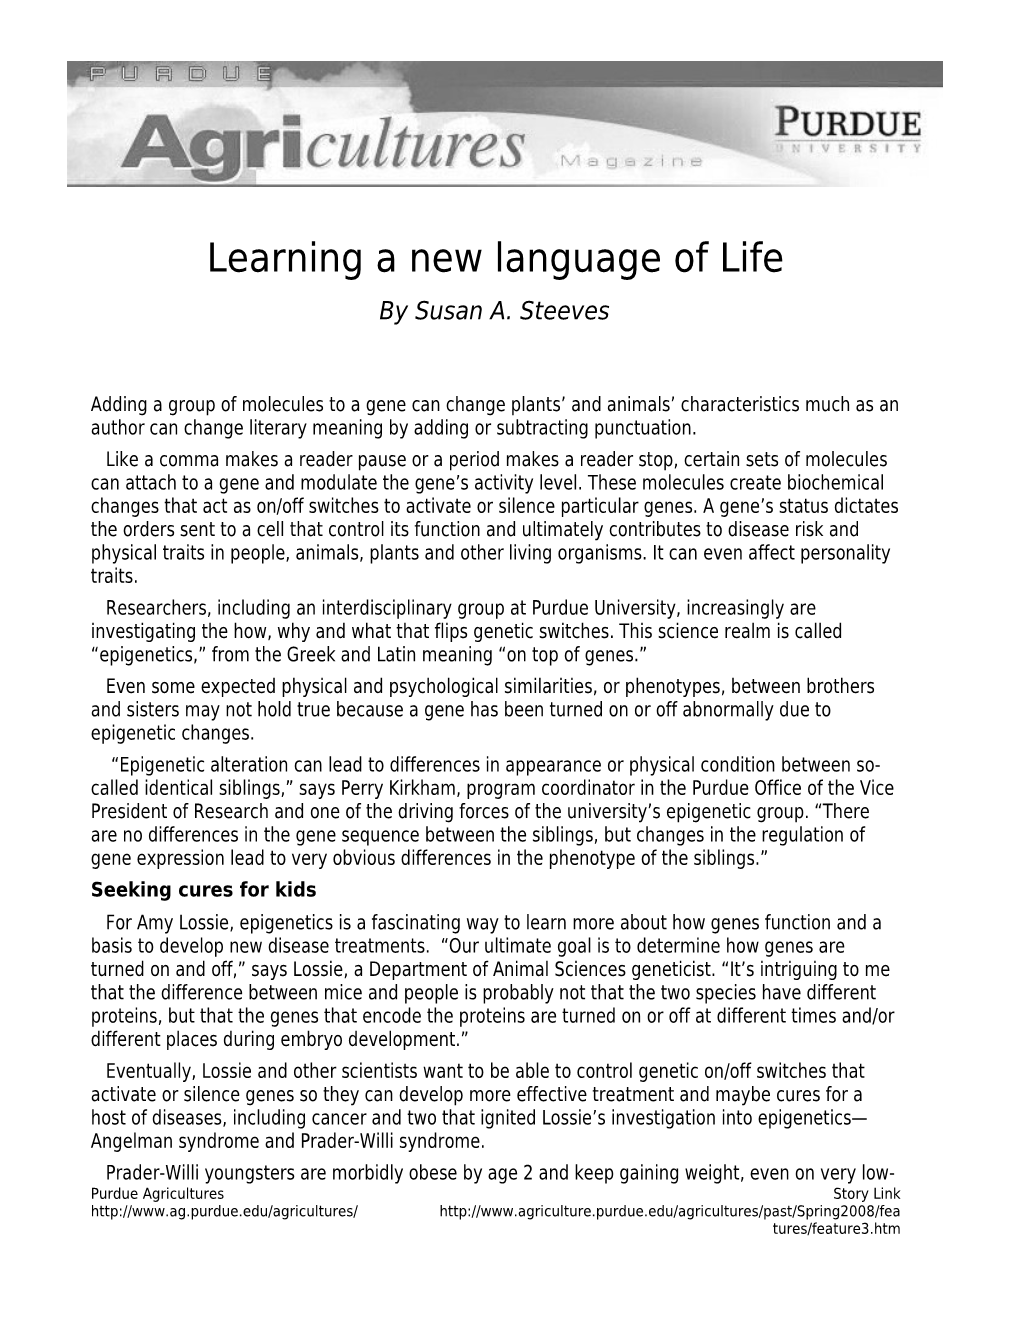 Learning a New Language of Life